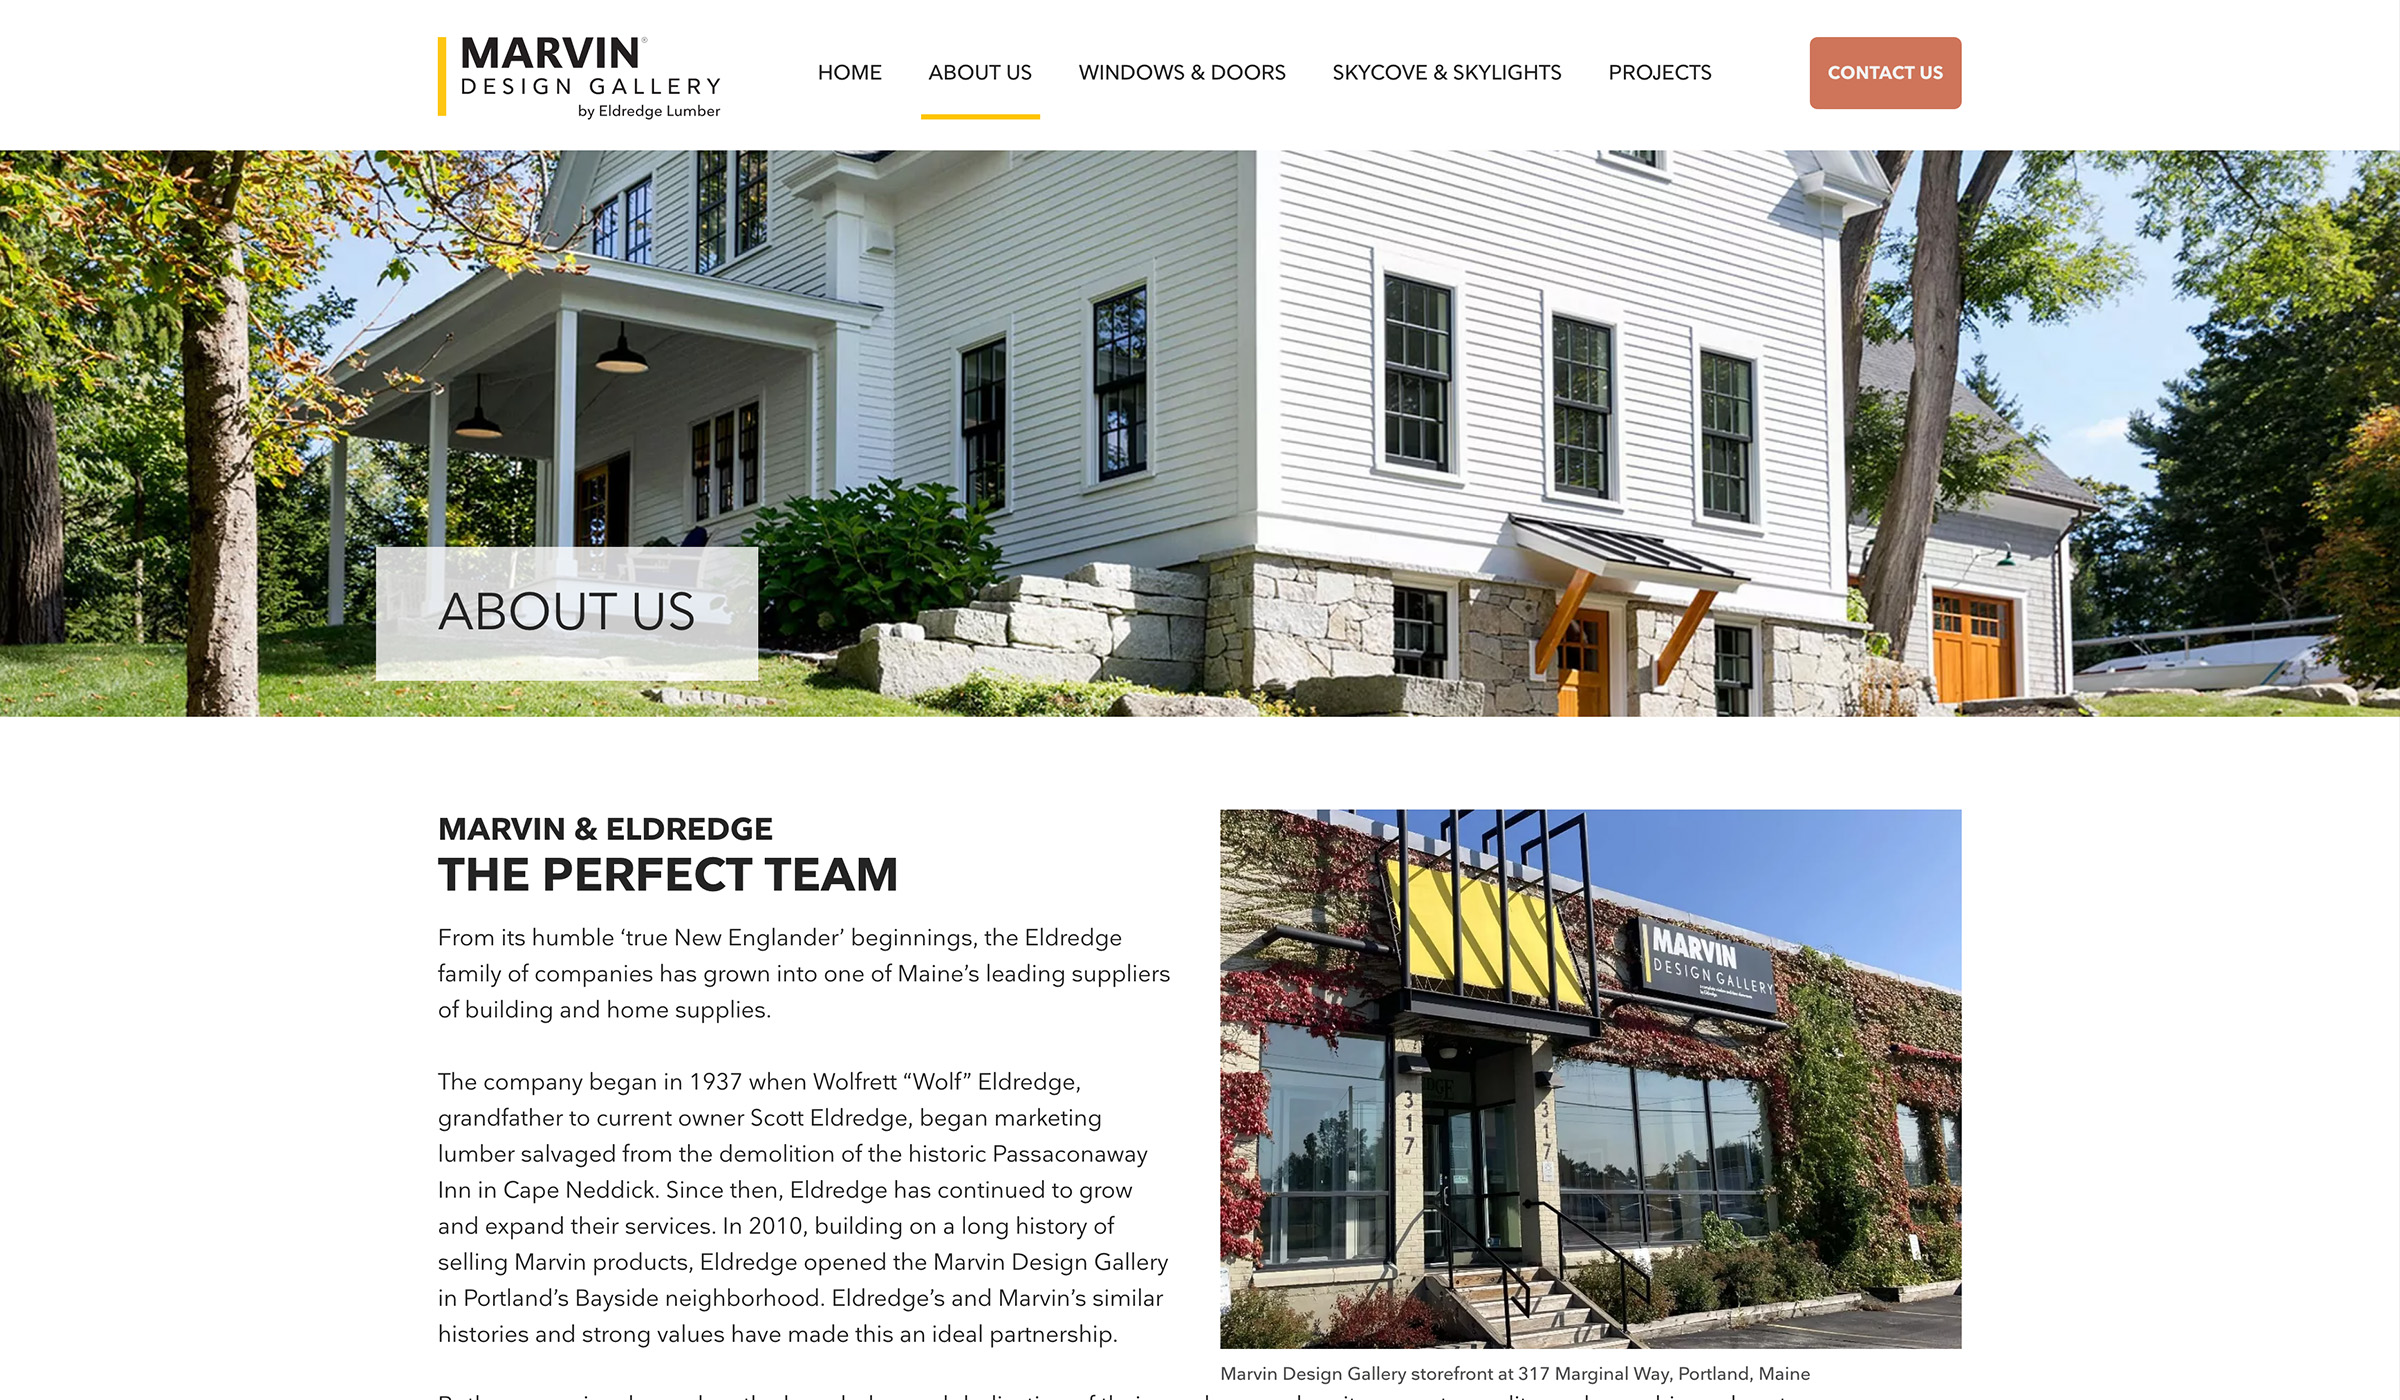 A website to learn more about the Marvin Design Gallery and Eldredge team.